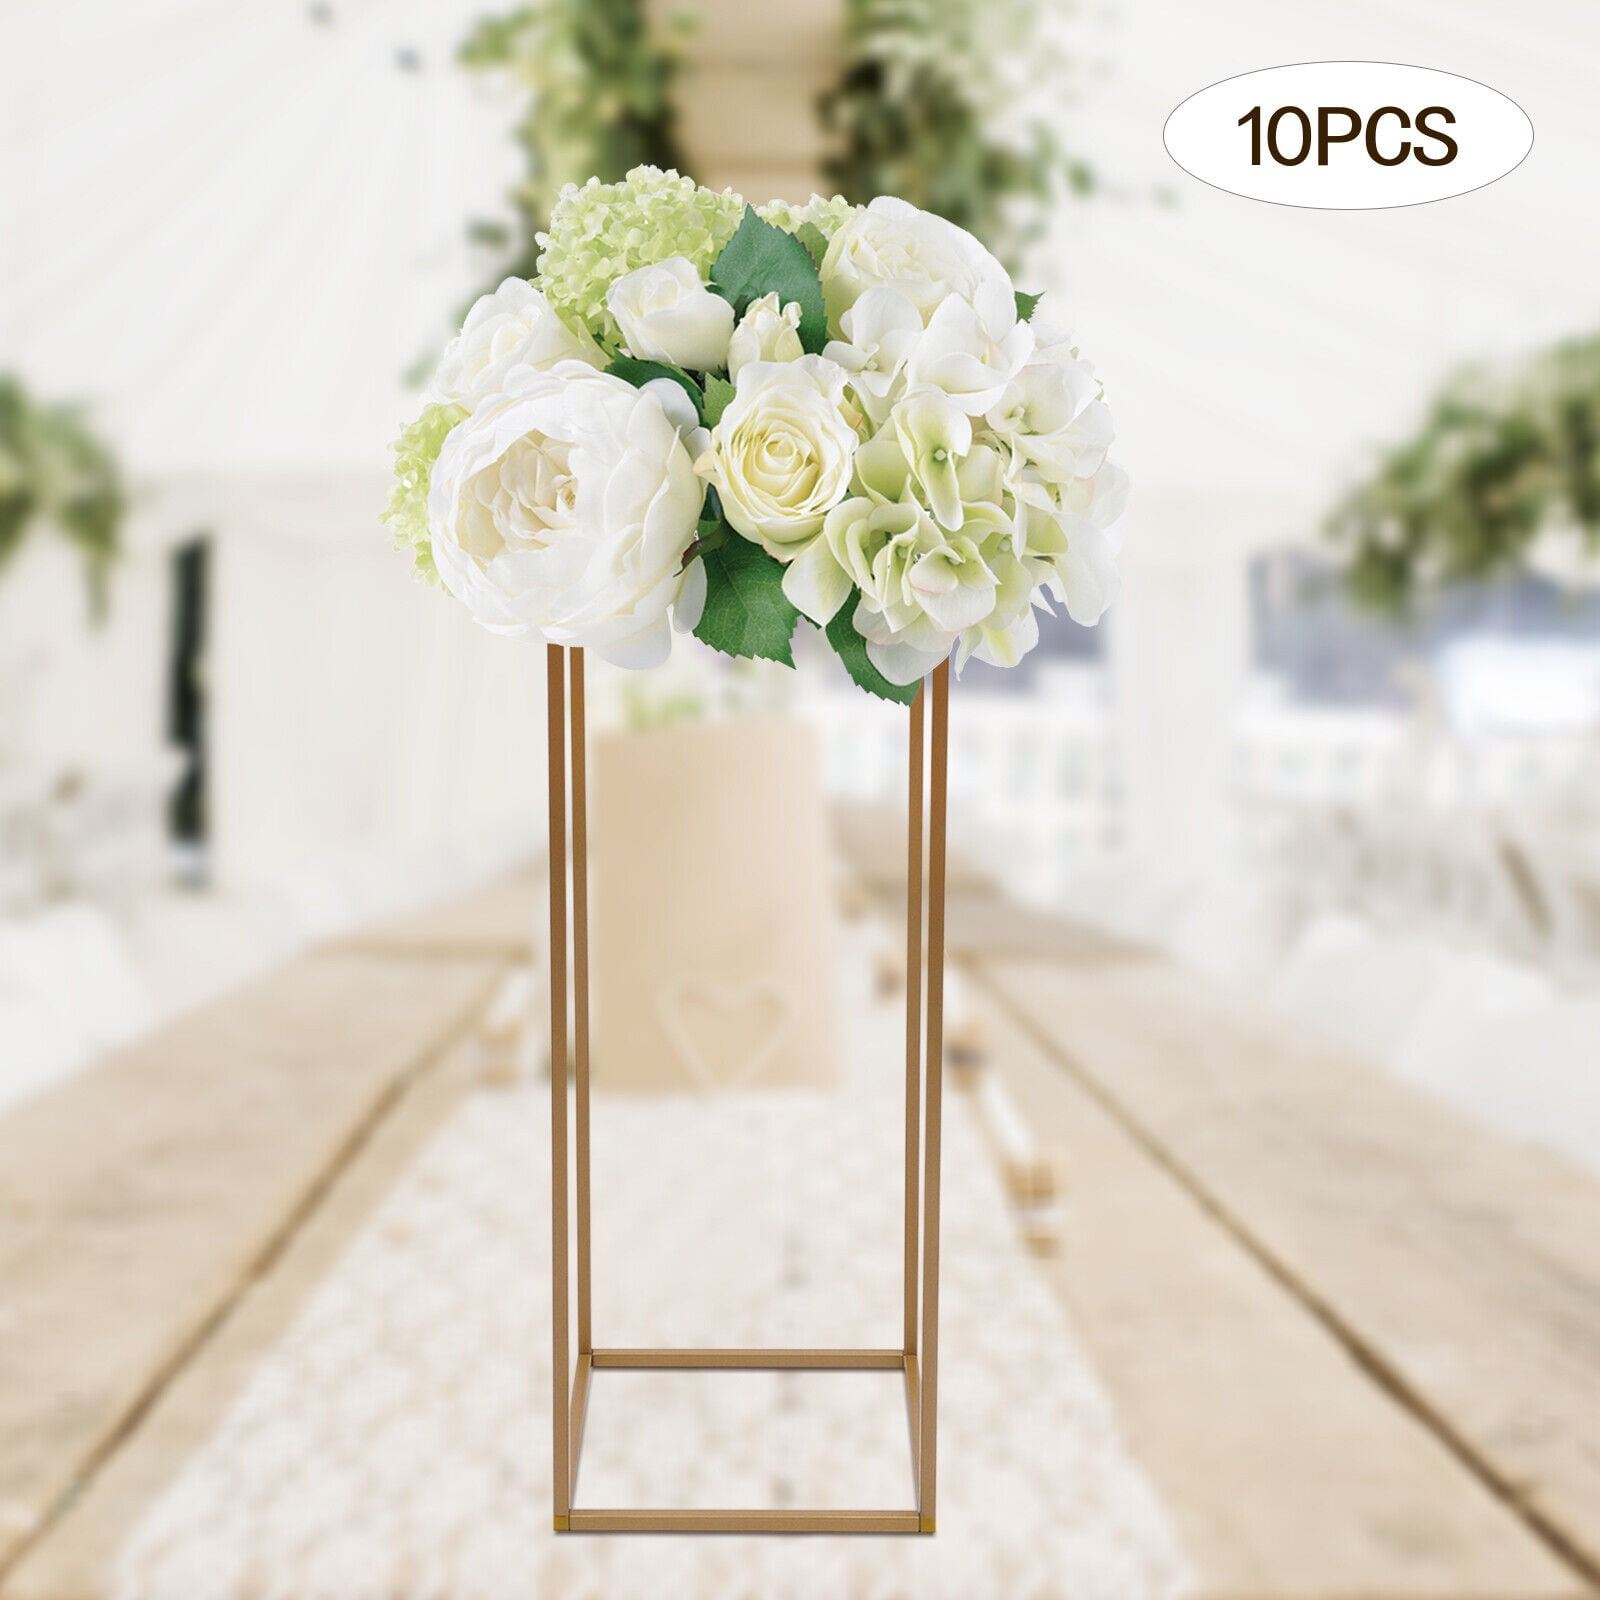 MIDUO 3Pcs Wedding Metal Flower Stand Rectangular Geometric Floral Stand  for Decorations Home Party